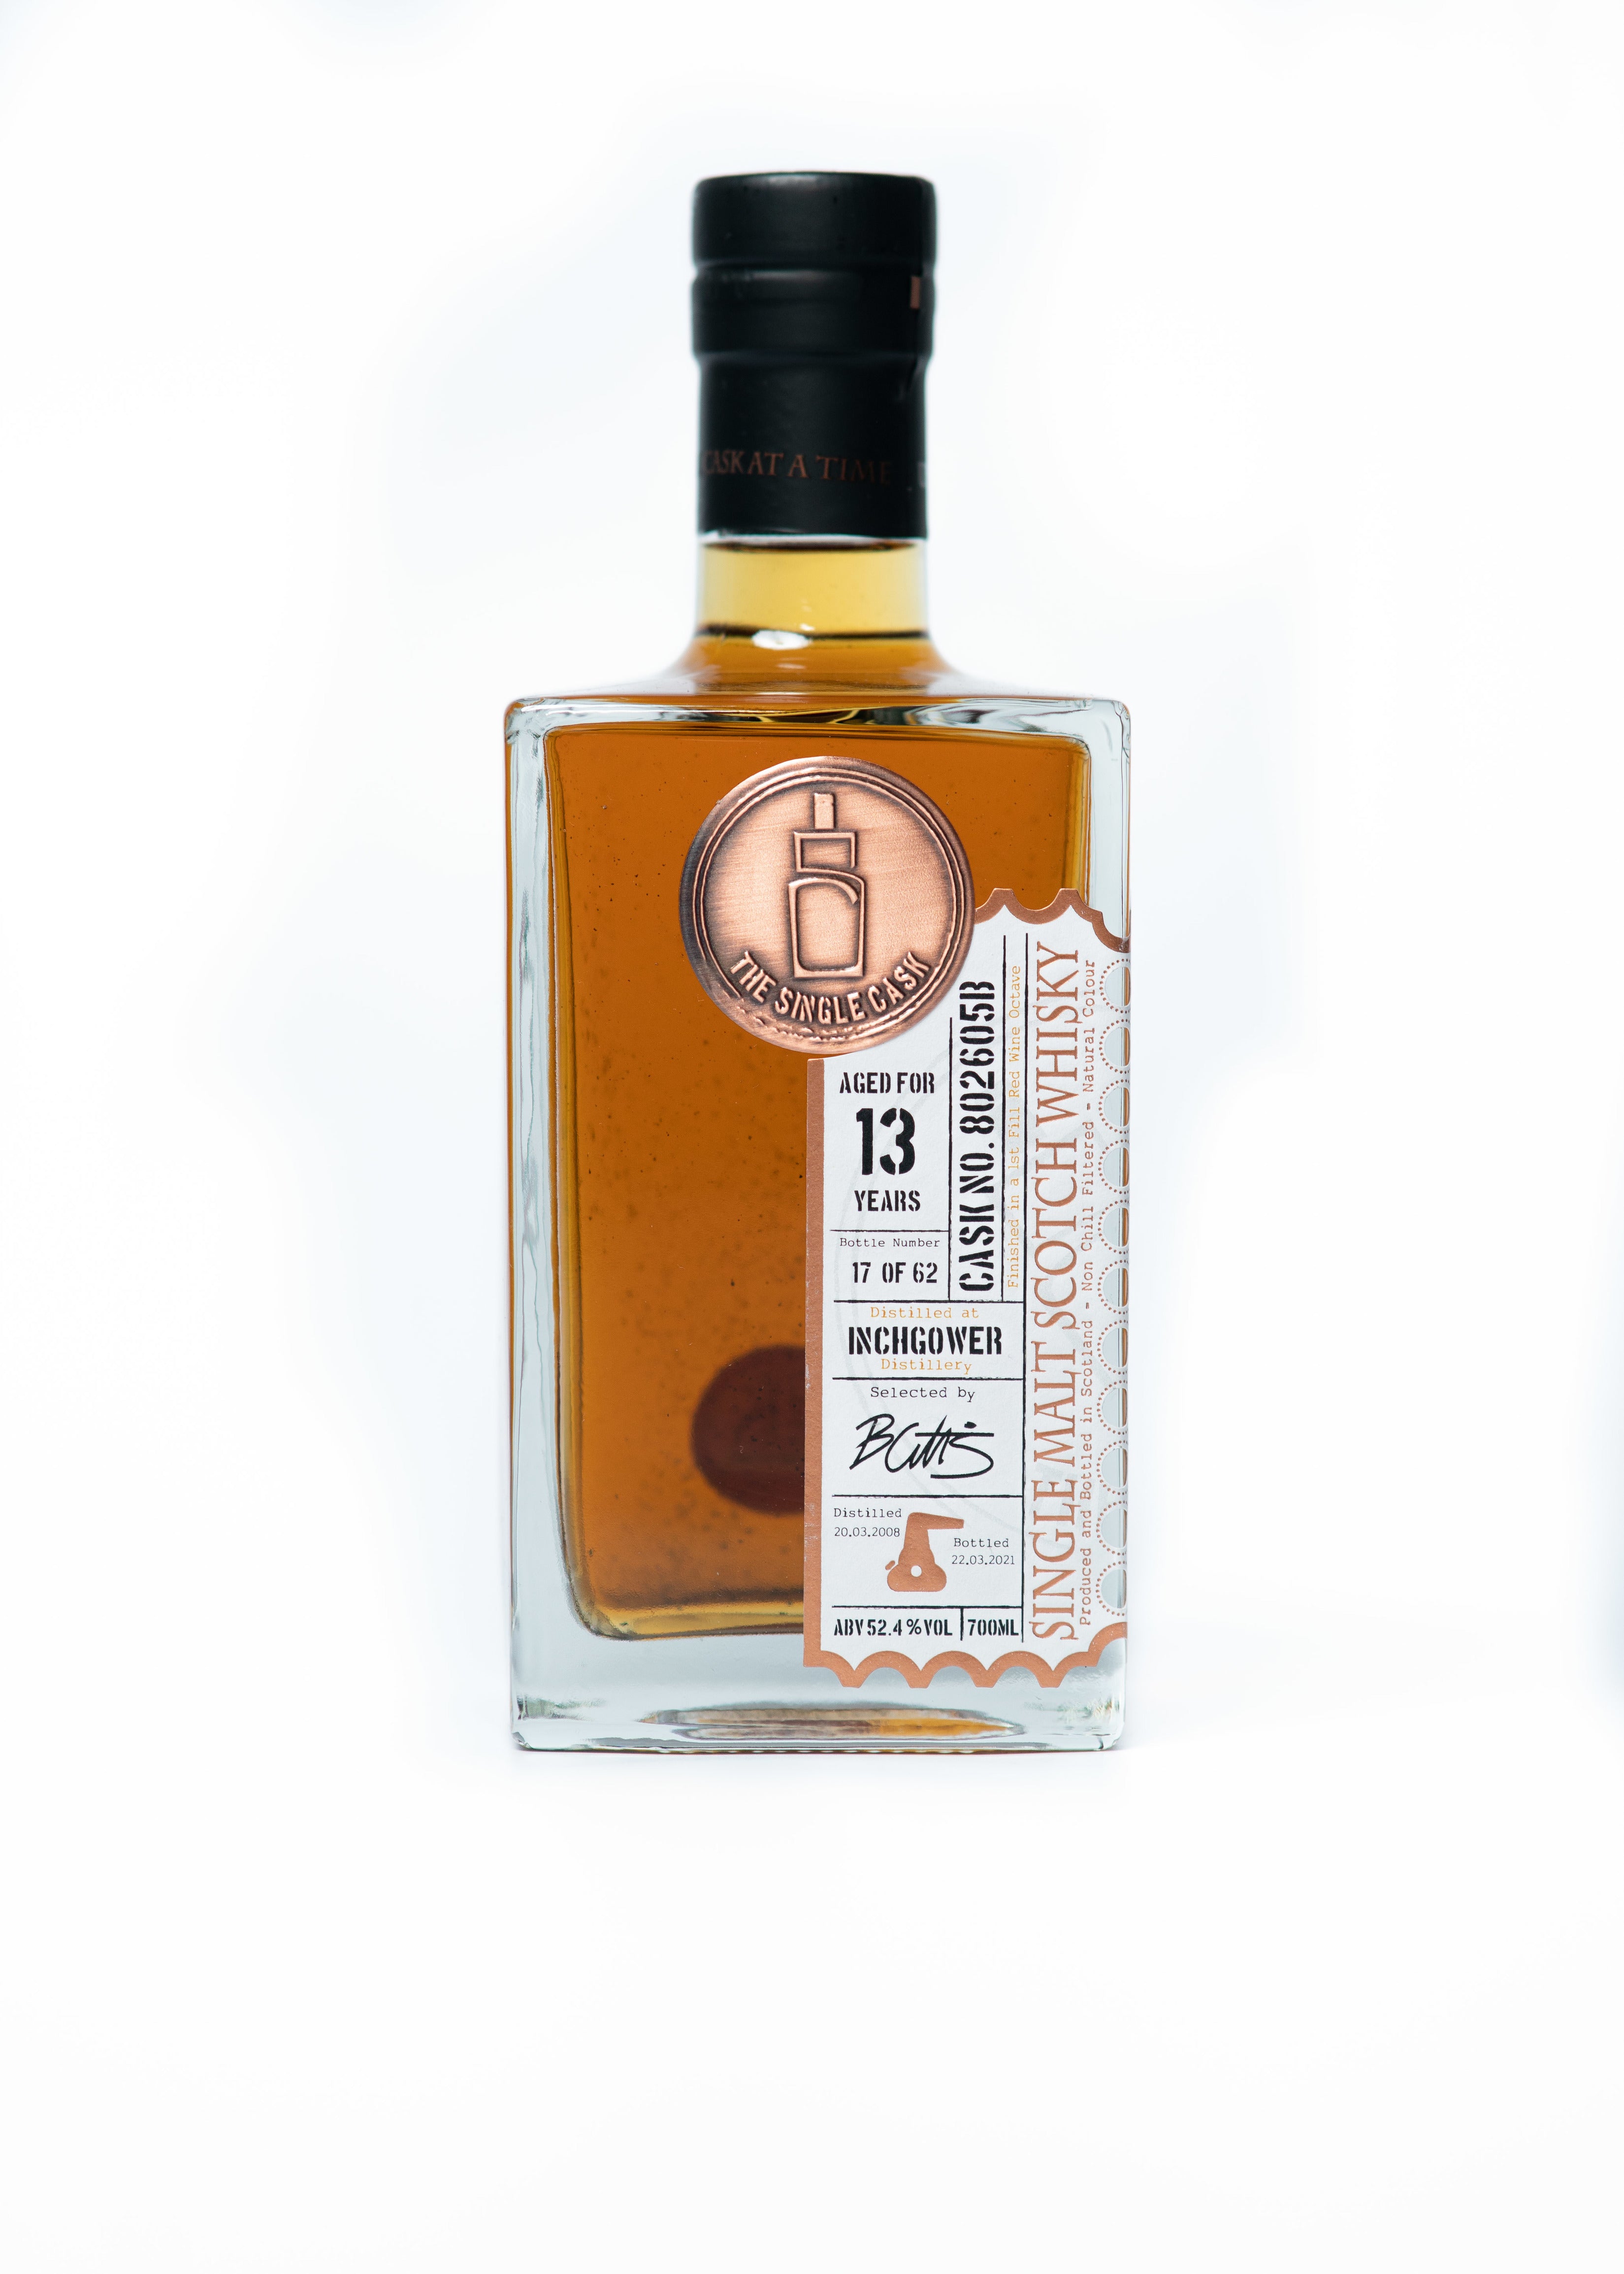 Inchgower 13 years old scotch whisky by The Single Cask independent bottler